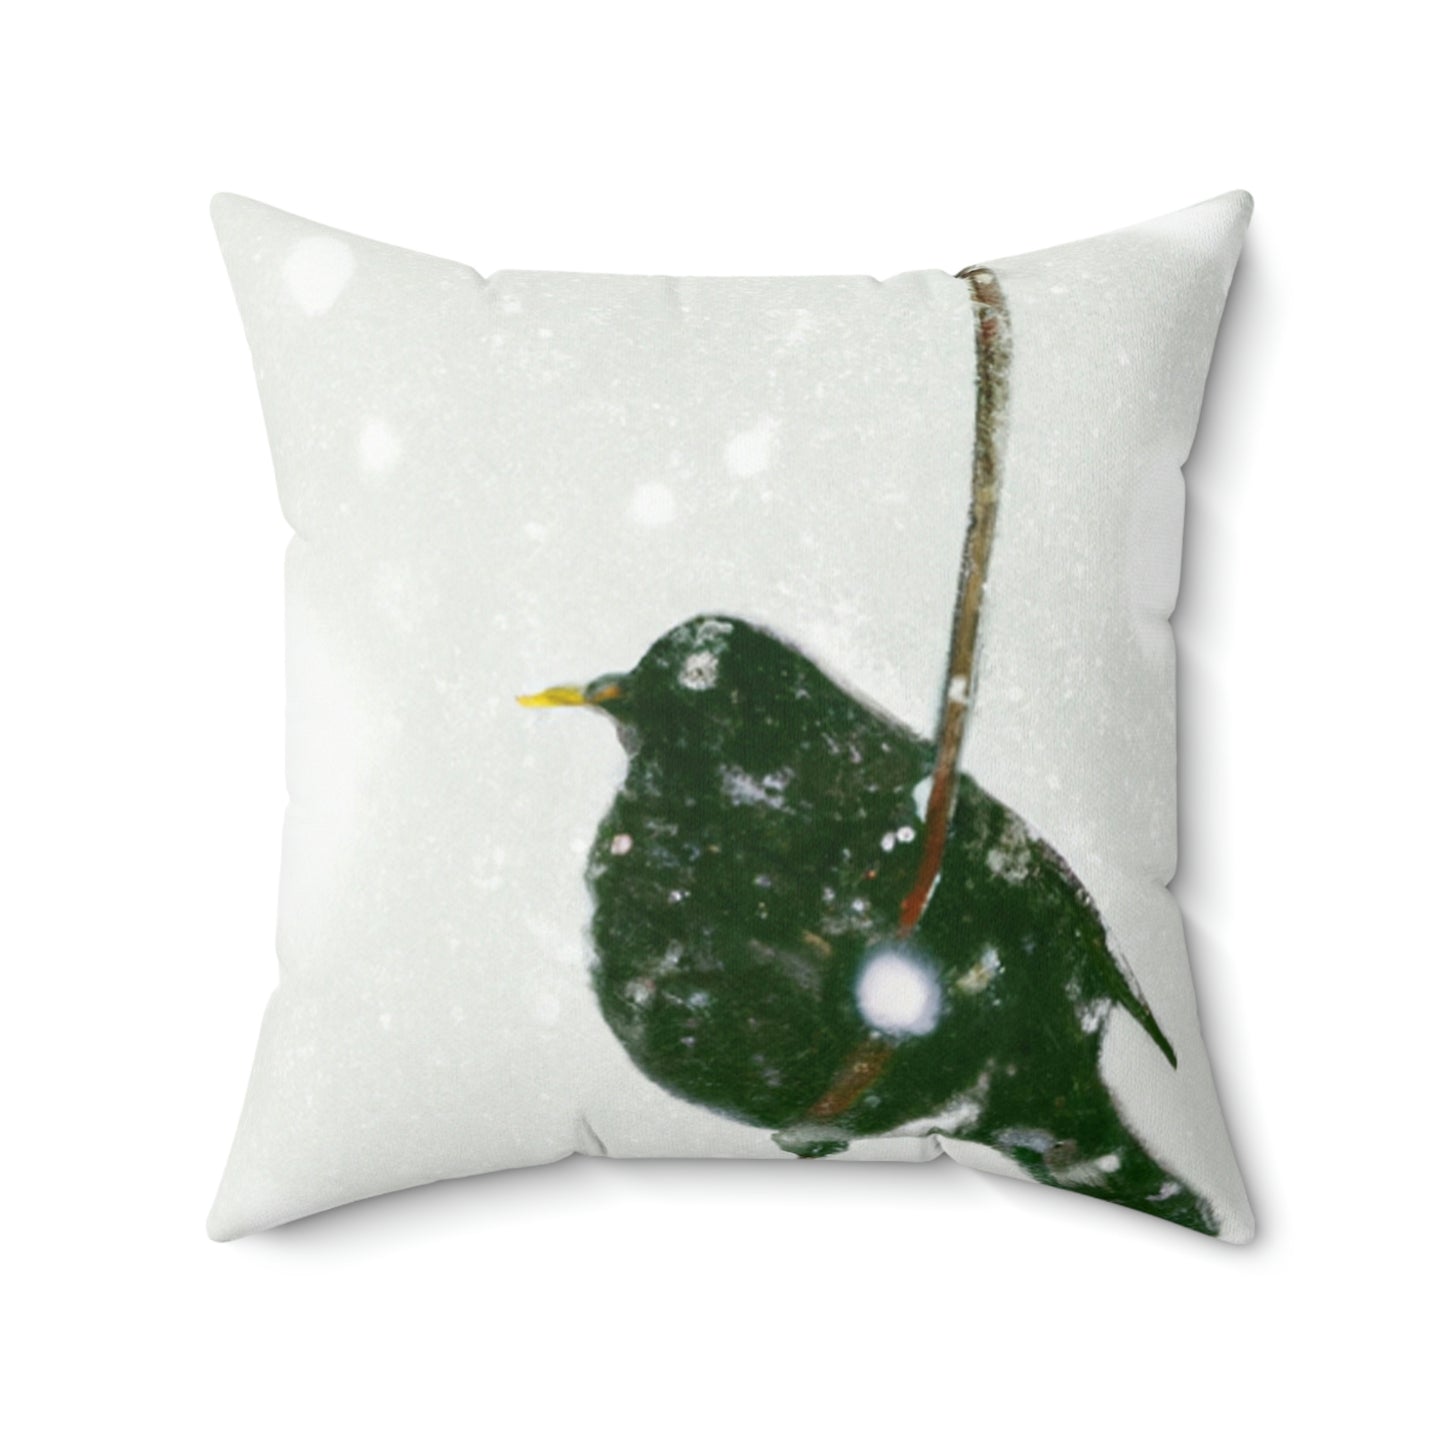 "The Solitary Nest-Builder in the Snow" - The Alien Square Pillow